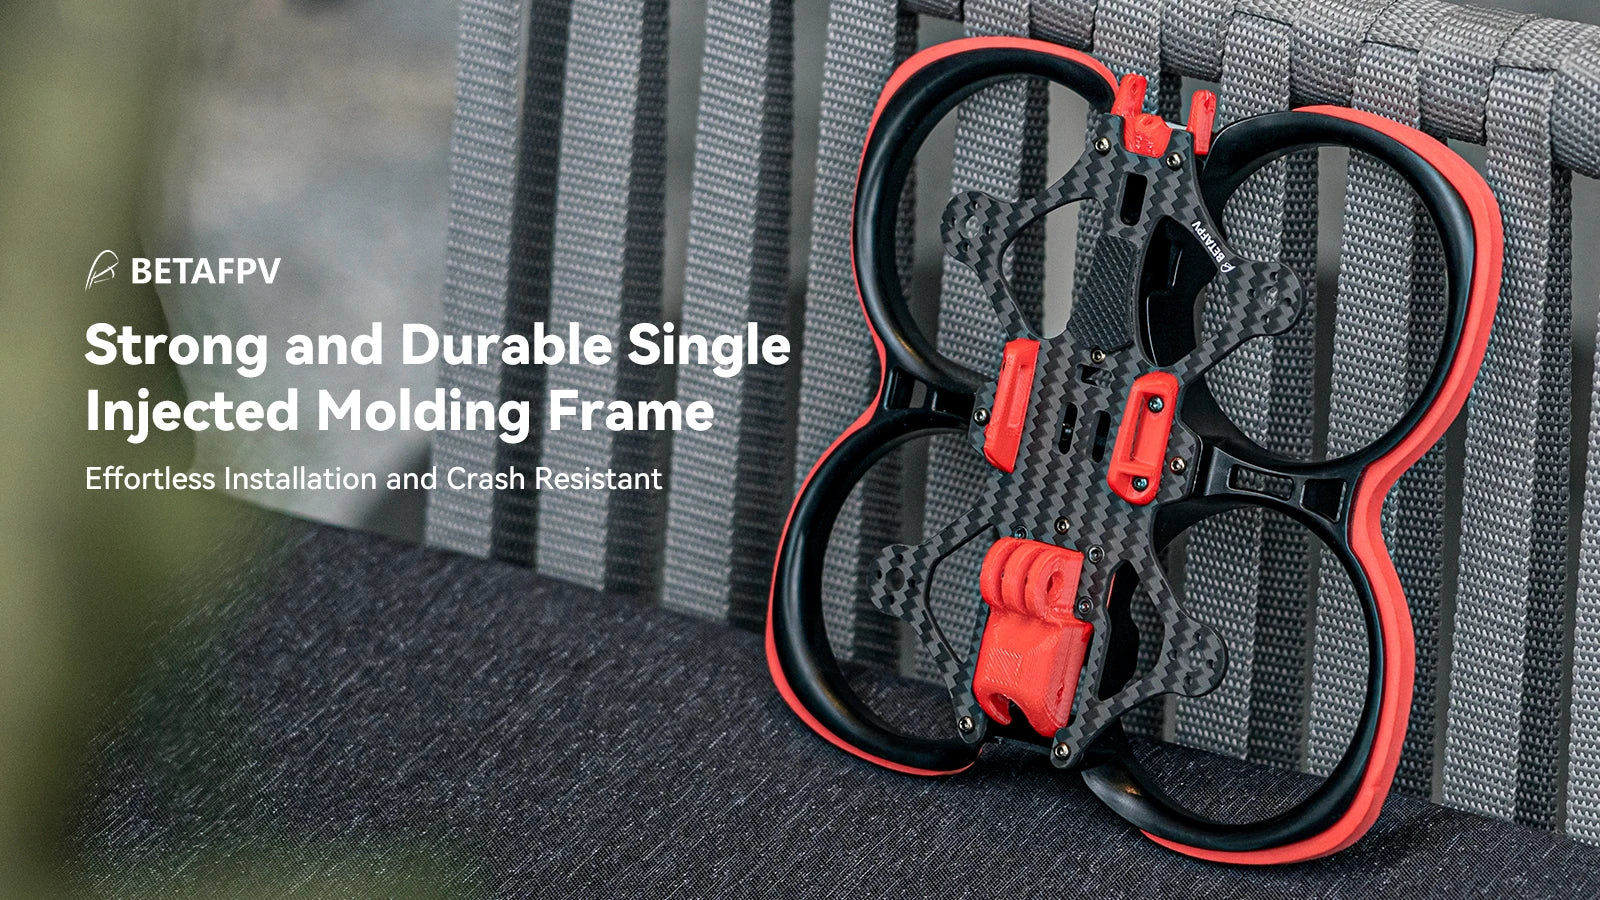 BETAFPV Pavo25 Whoop FPV, BETAFPV Strong and Durable Single Injected Molding Frame Effort